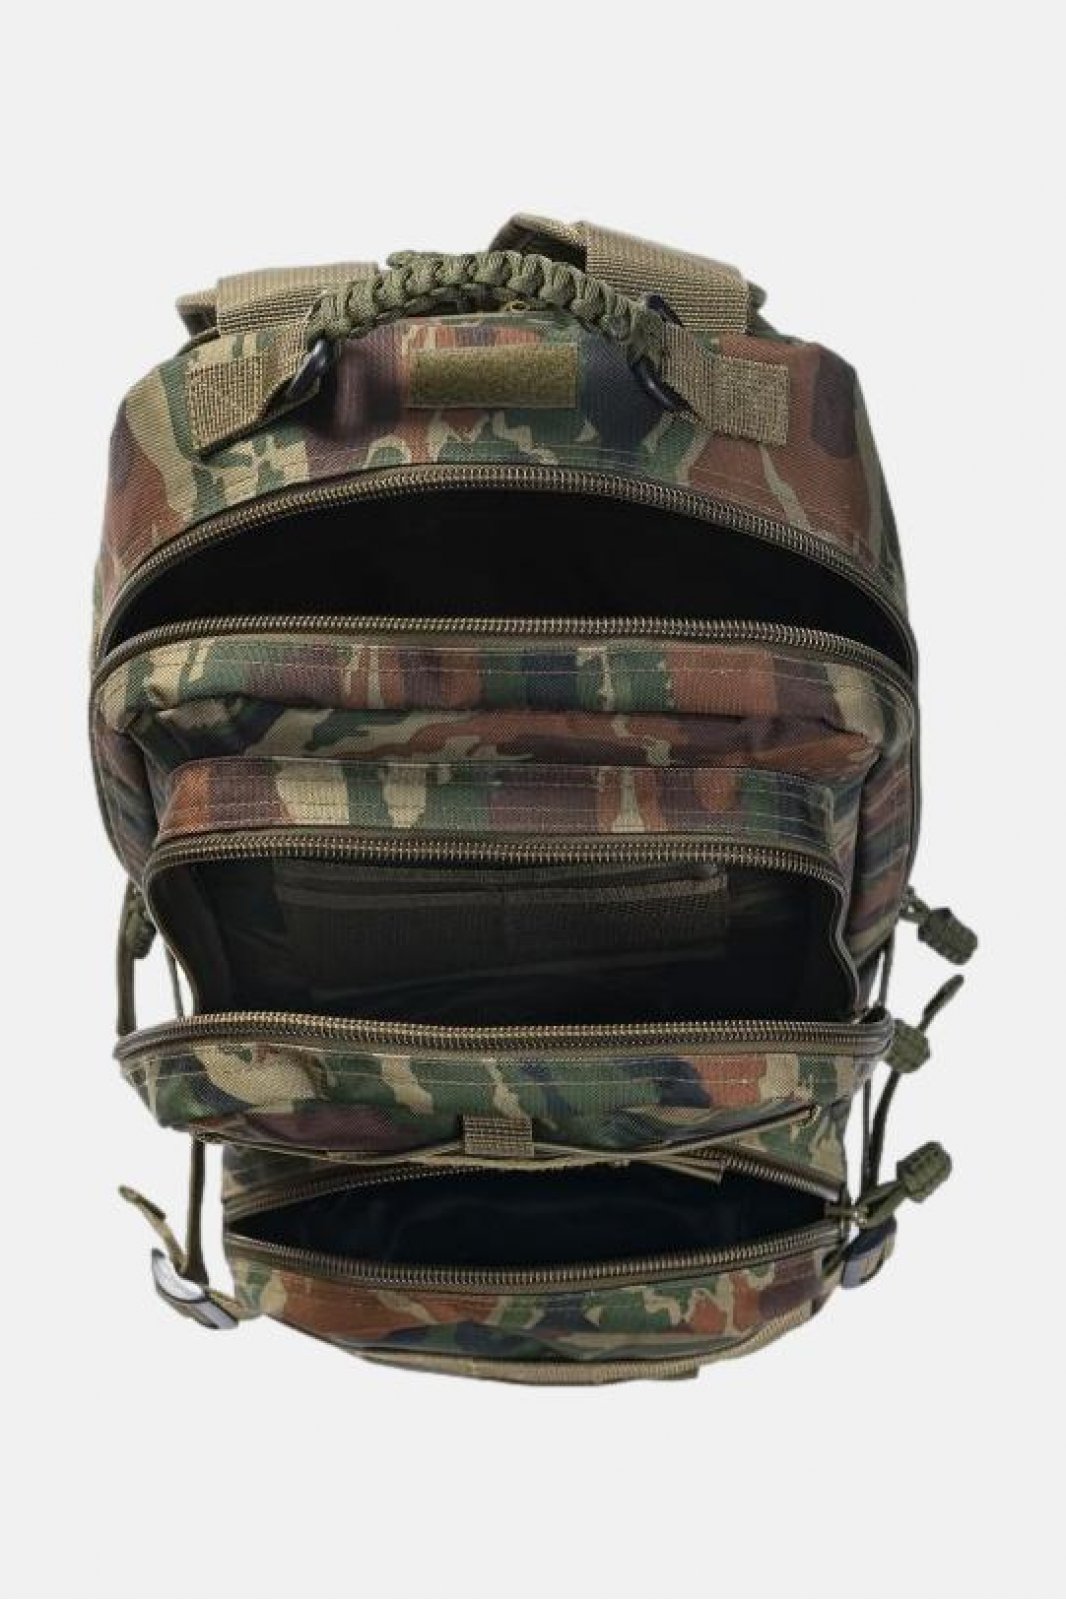 Military BACKPACK ARMY RACE 25lt 705A